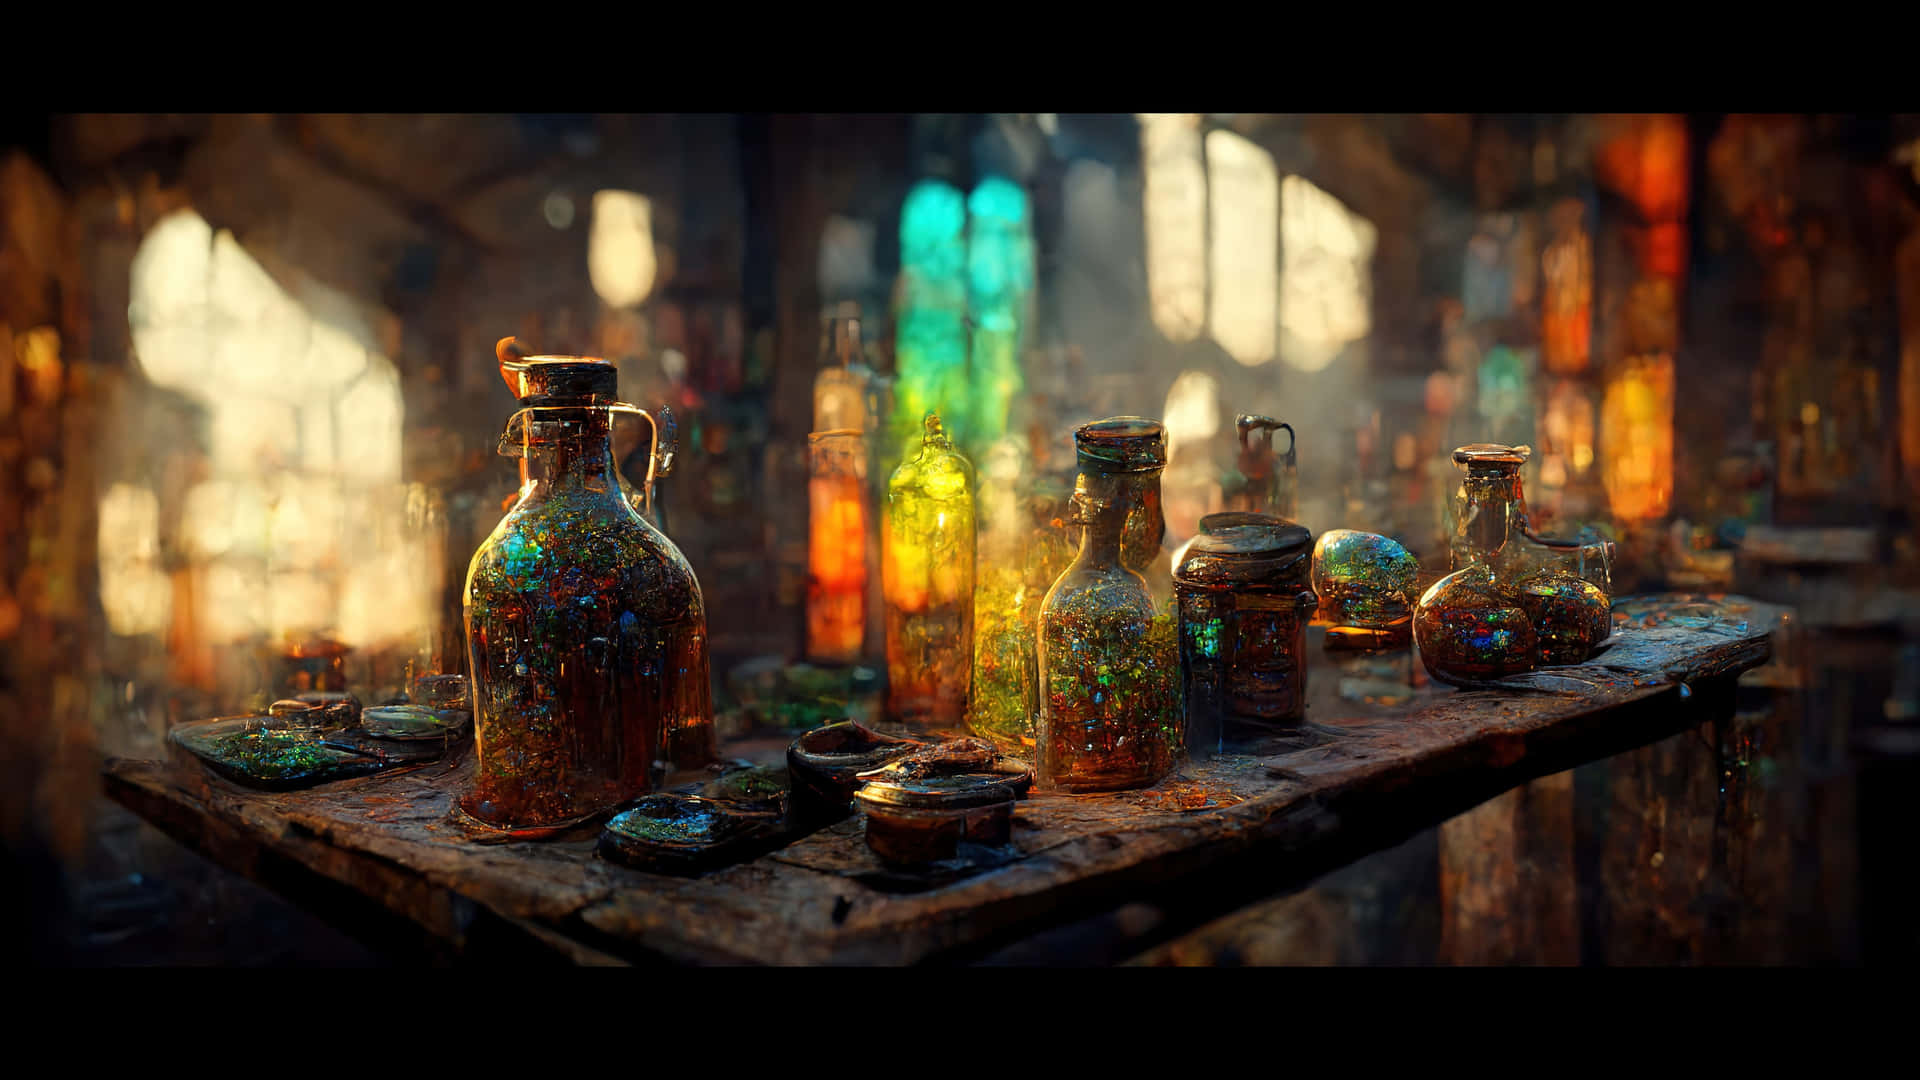 Welcome to The Hogwarts Potions Class where magical concoctions come to life. Wallpaper